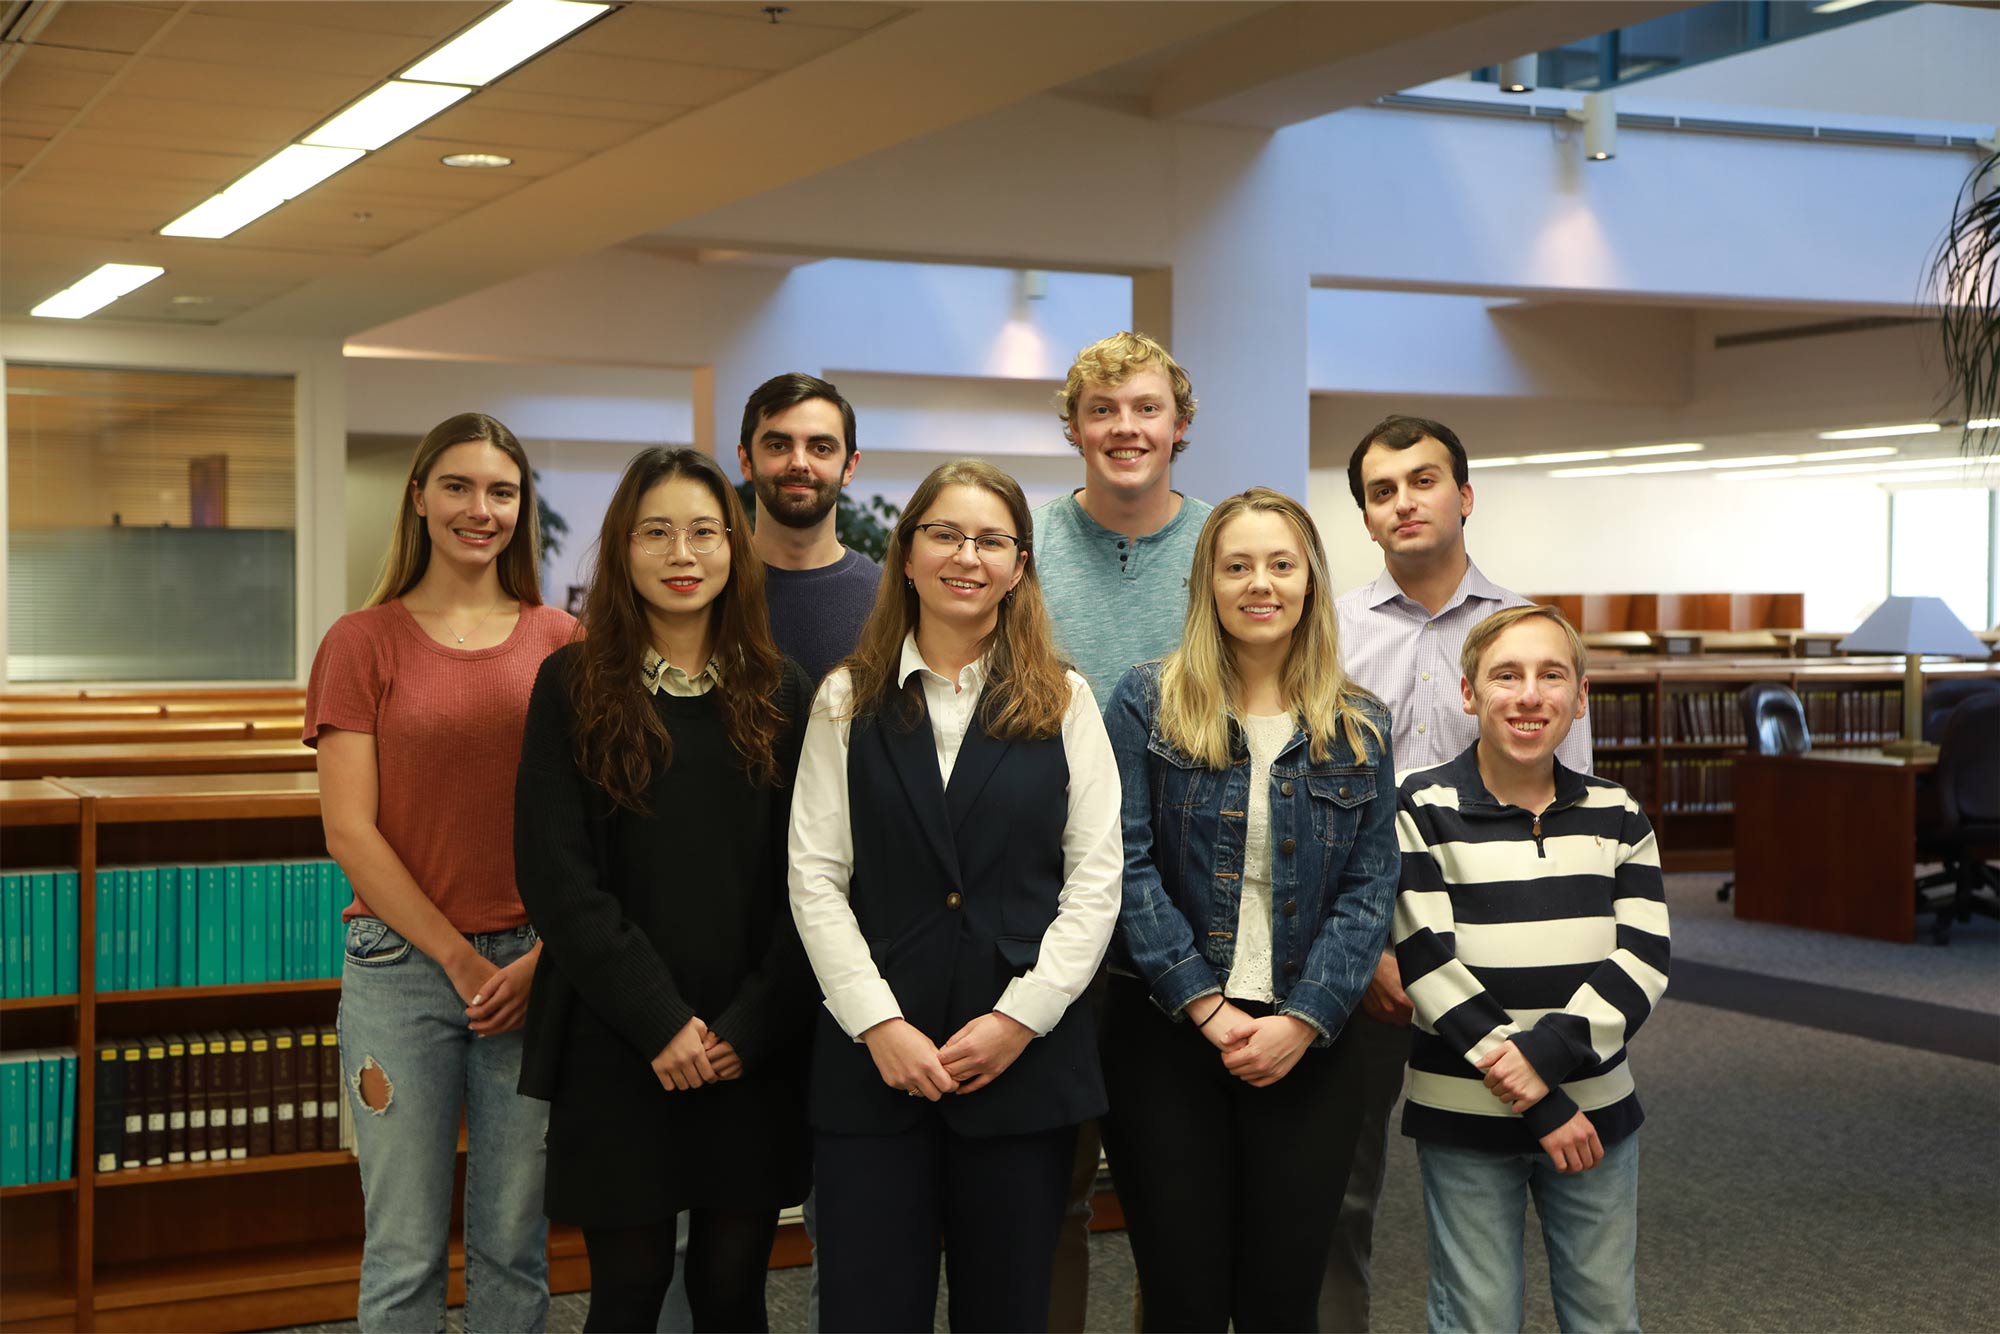 Olena Protsenko with Claudia Frykberg, Yali Liang, Stewart Lawrence, Justin Roberts, Megan Chapelle, Gregory Mekenian and Ryan Carp gathered around posing for picture in the Law Library